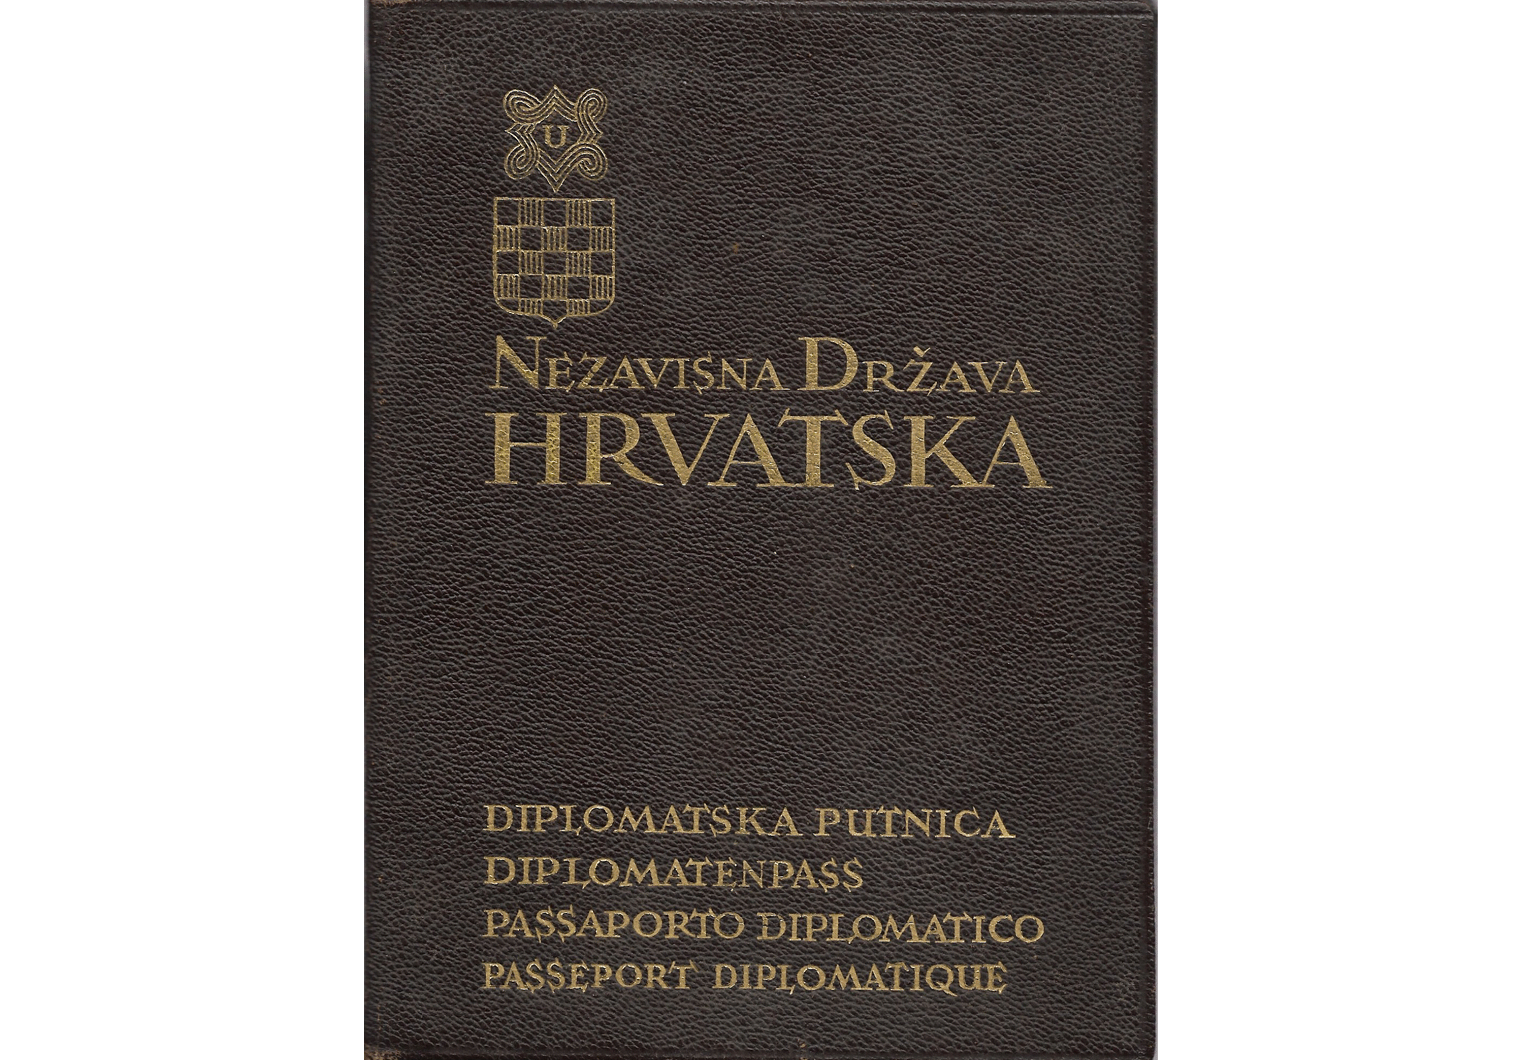 Croatian Foreign Minister's Diplomatic passport